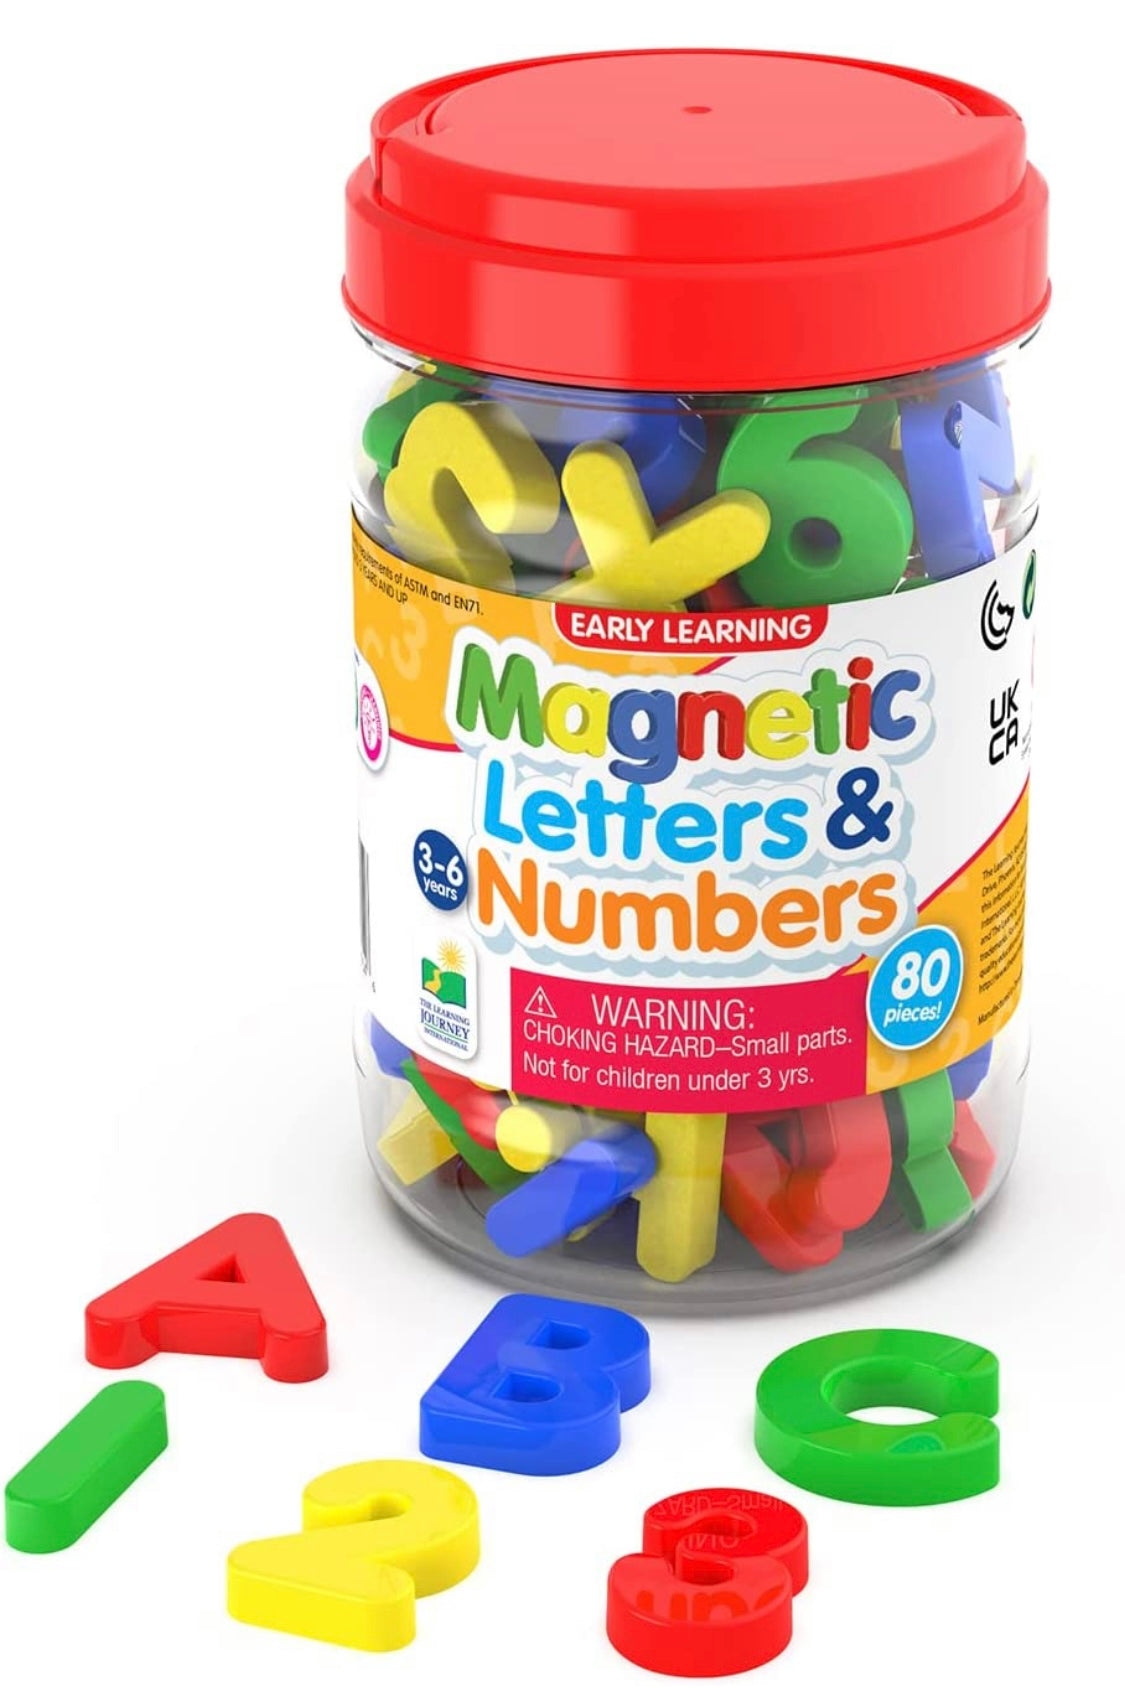 The Learning Journey Magnetic Letter & Numbers